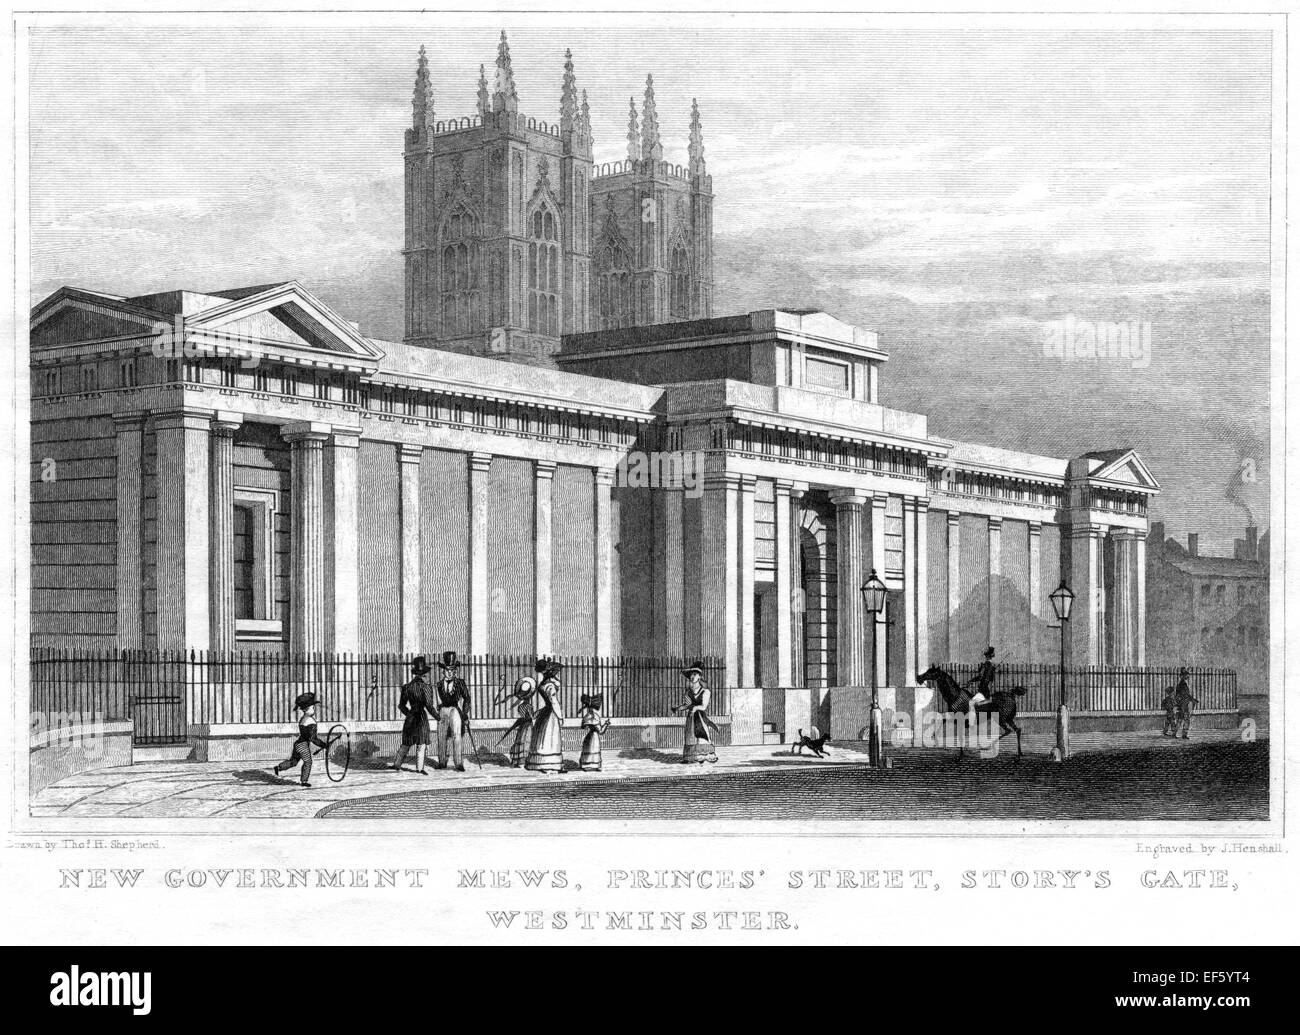 An engraving of New Government Mews, Princes Street, Storys Gate, Westminster scanned from a publication printed in 1828. Stock Photo